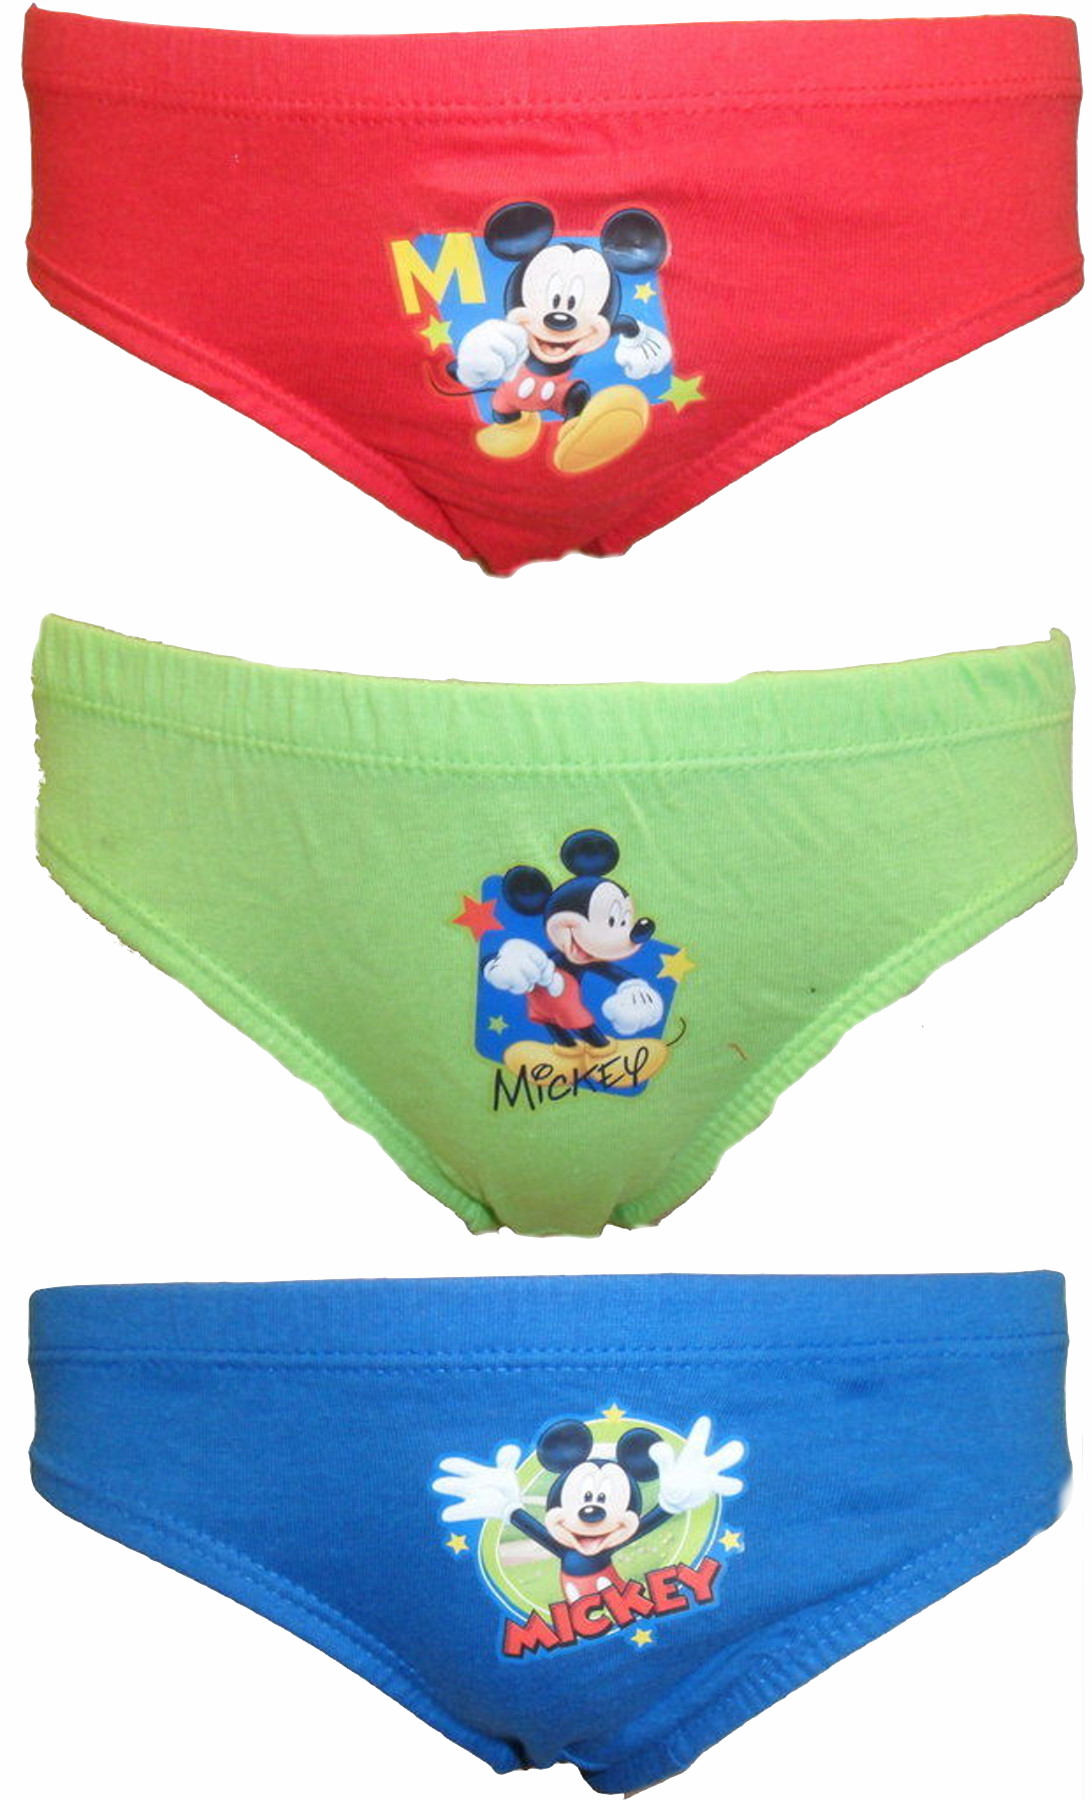 Mickey Mouse Briefs BUW05A.jpg  by Thingimijigs